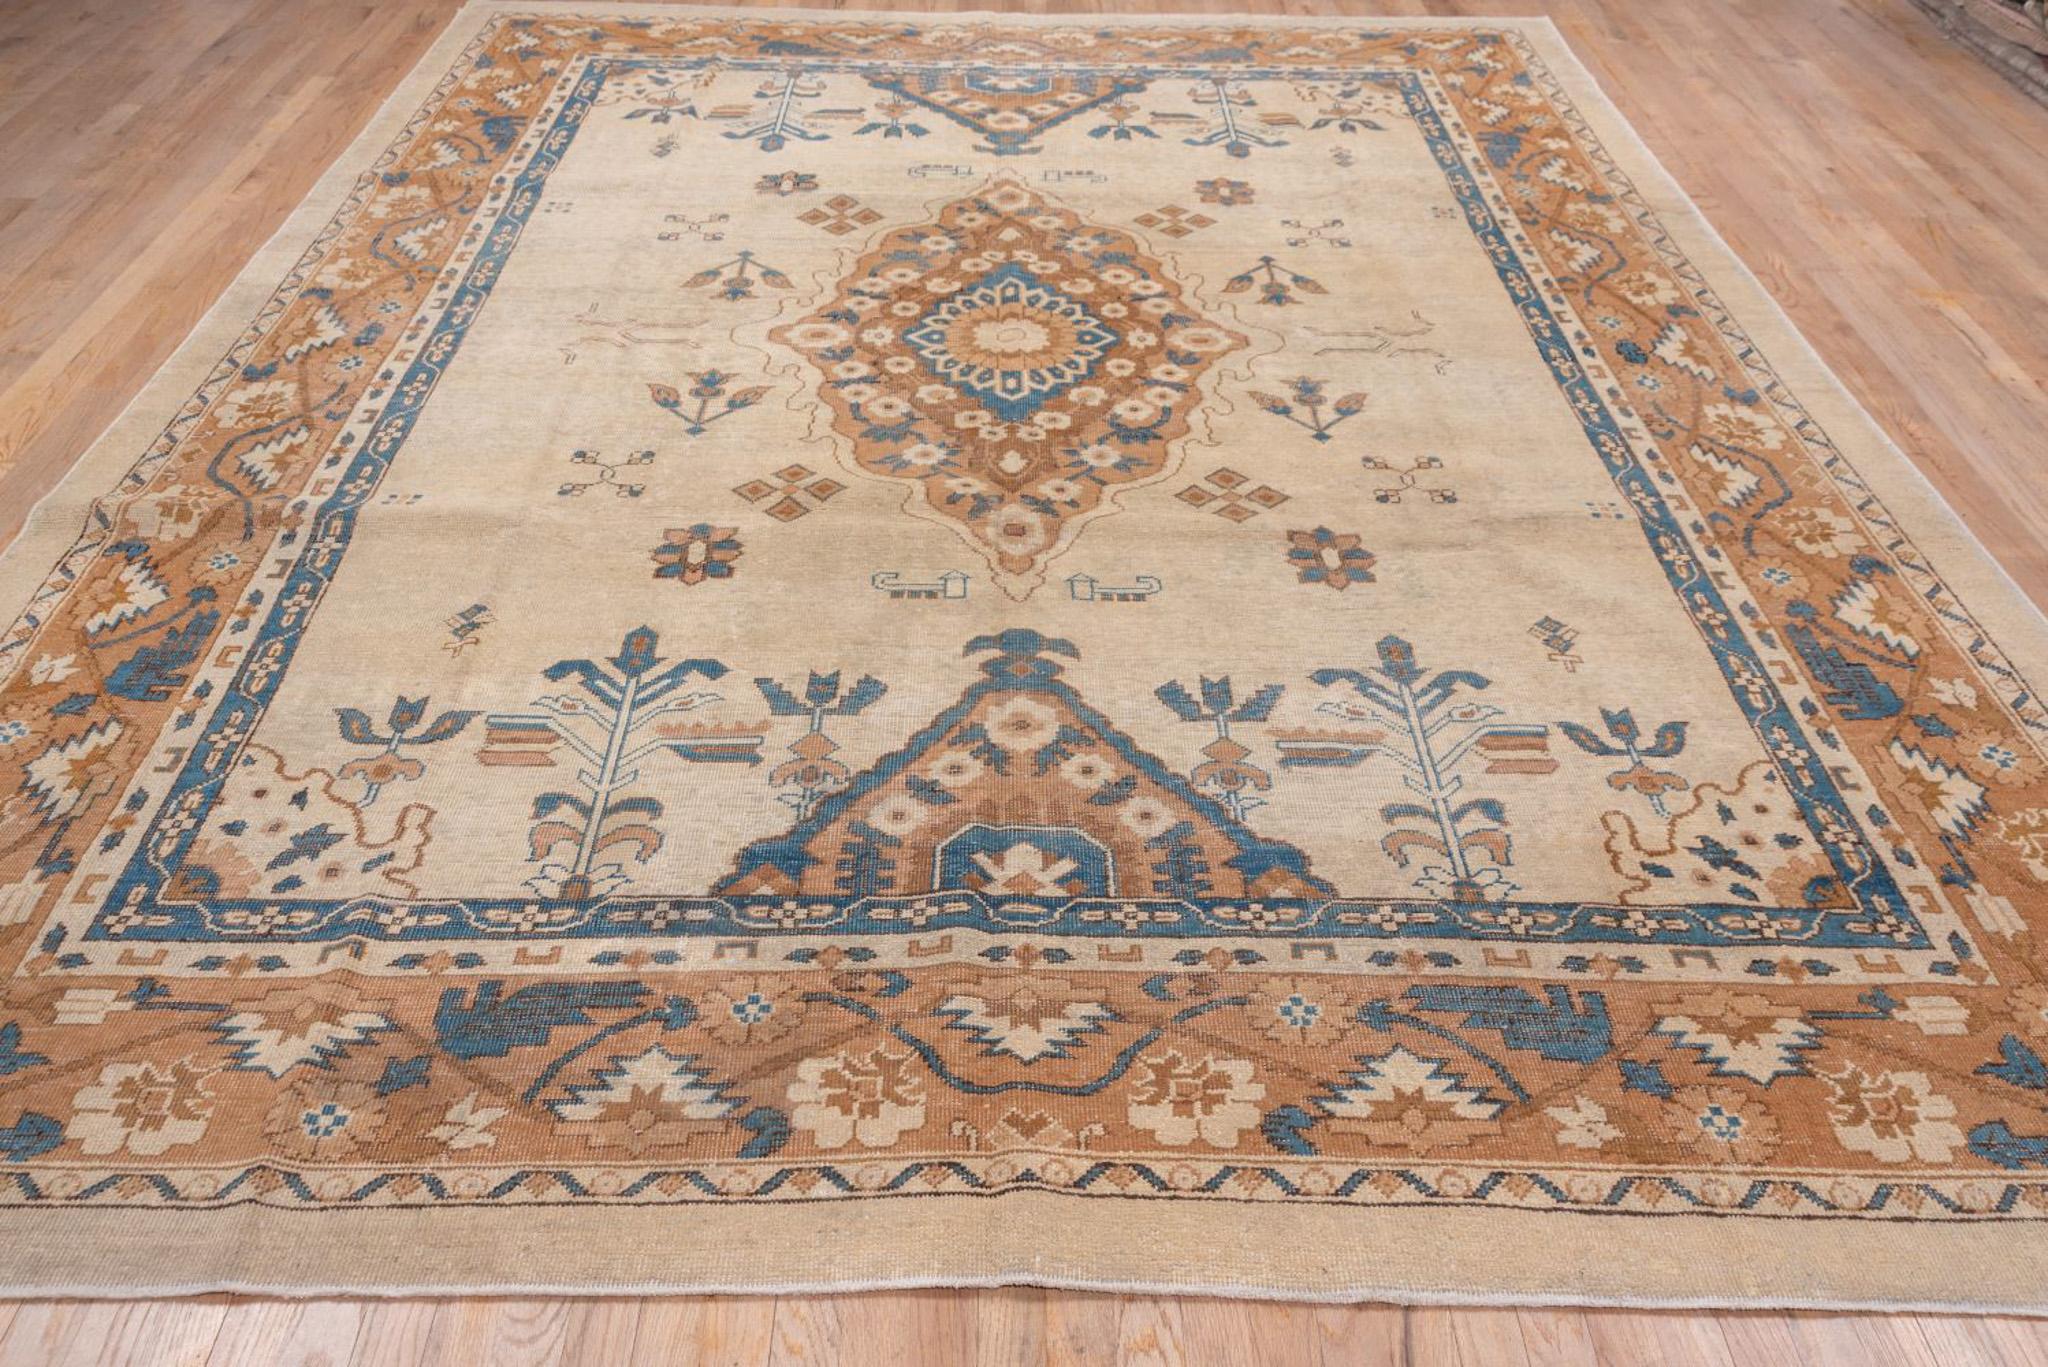 Hand-Knotted An Amritzar Rug circa 1920. For Sale